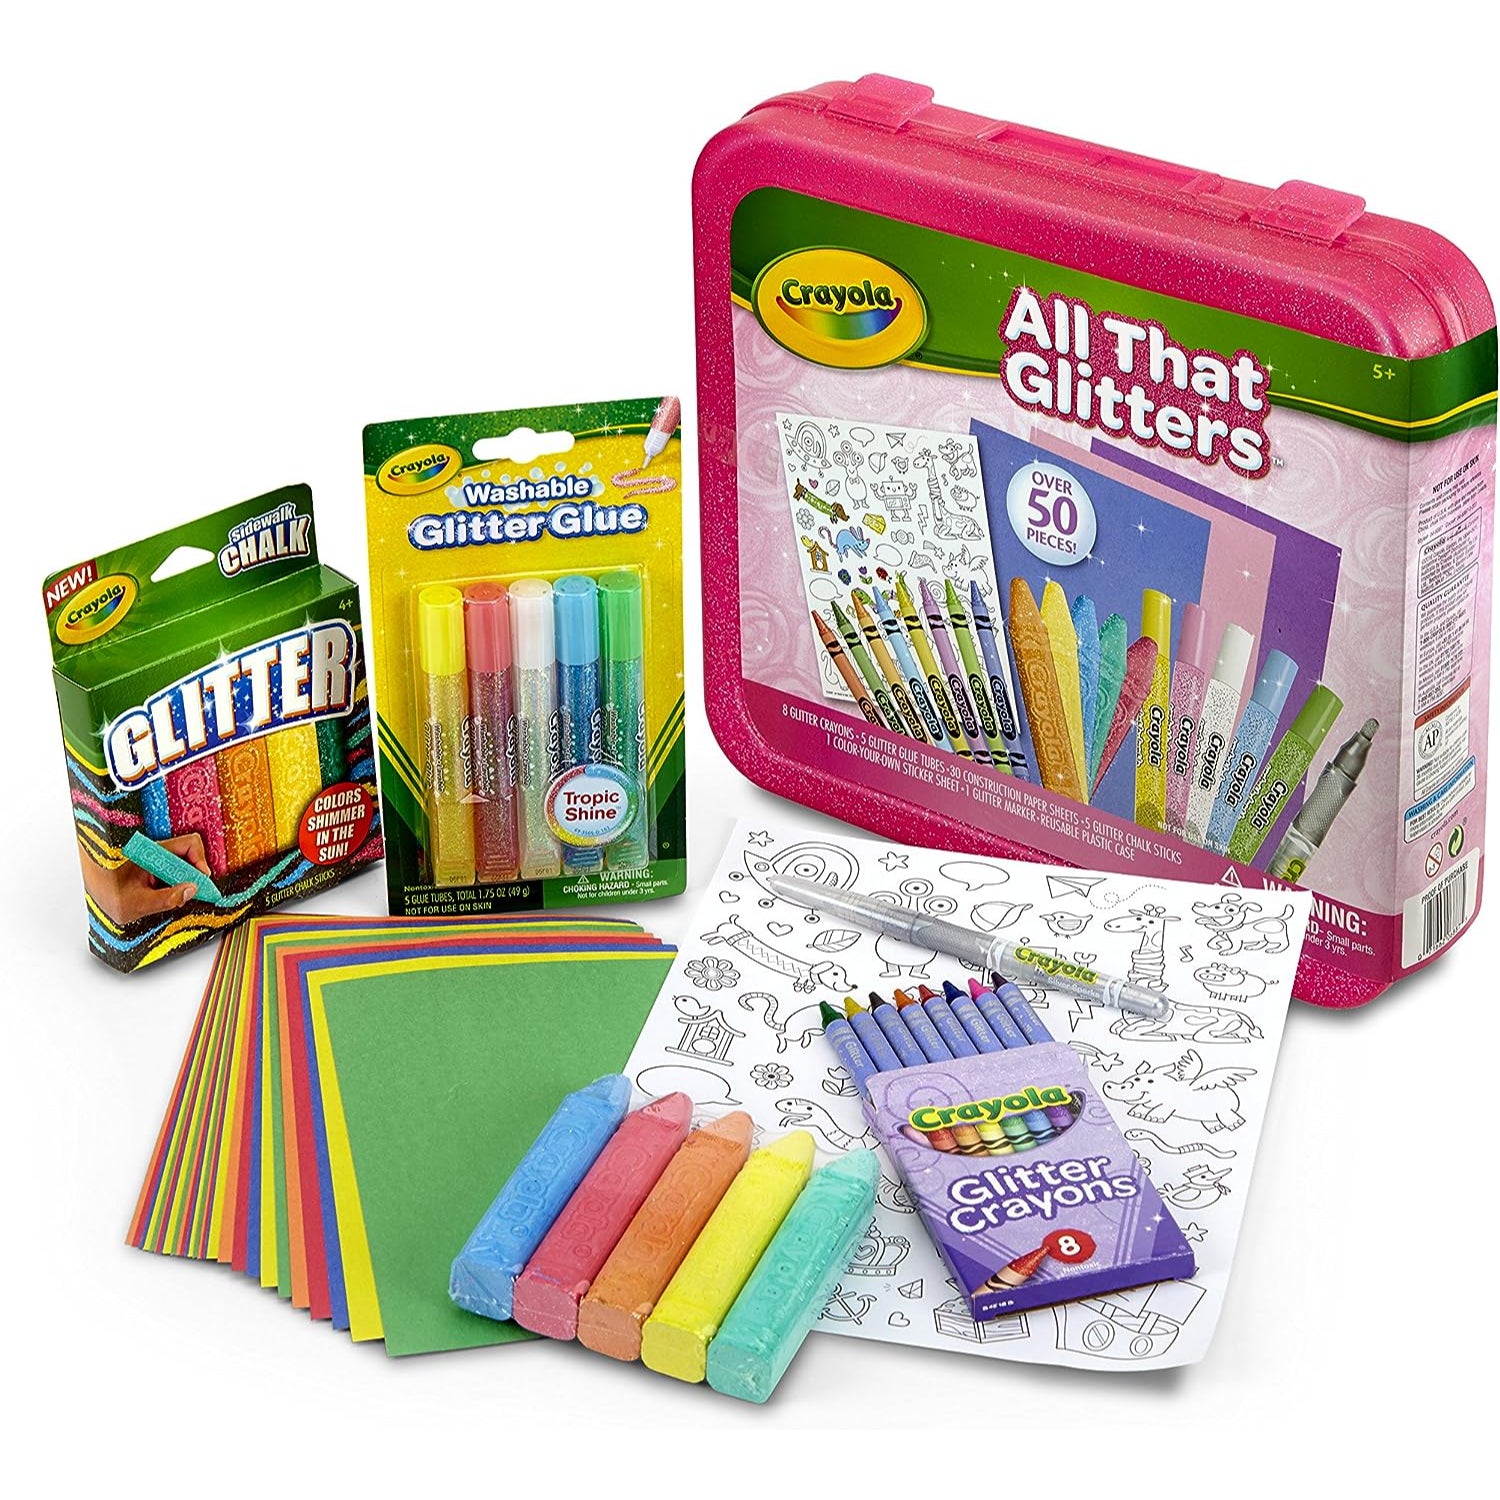  Crayola Crayon Set with Coloring Pages, Gift for Kids